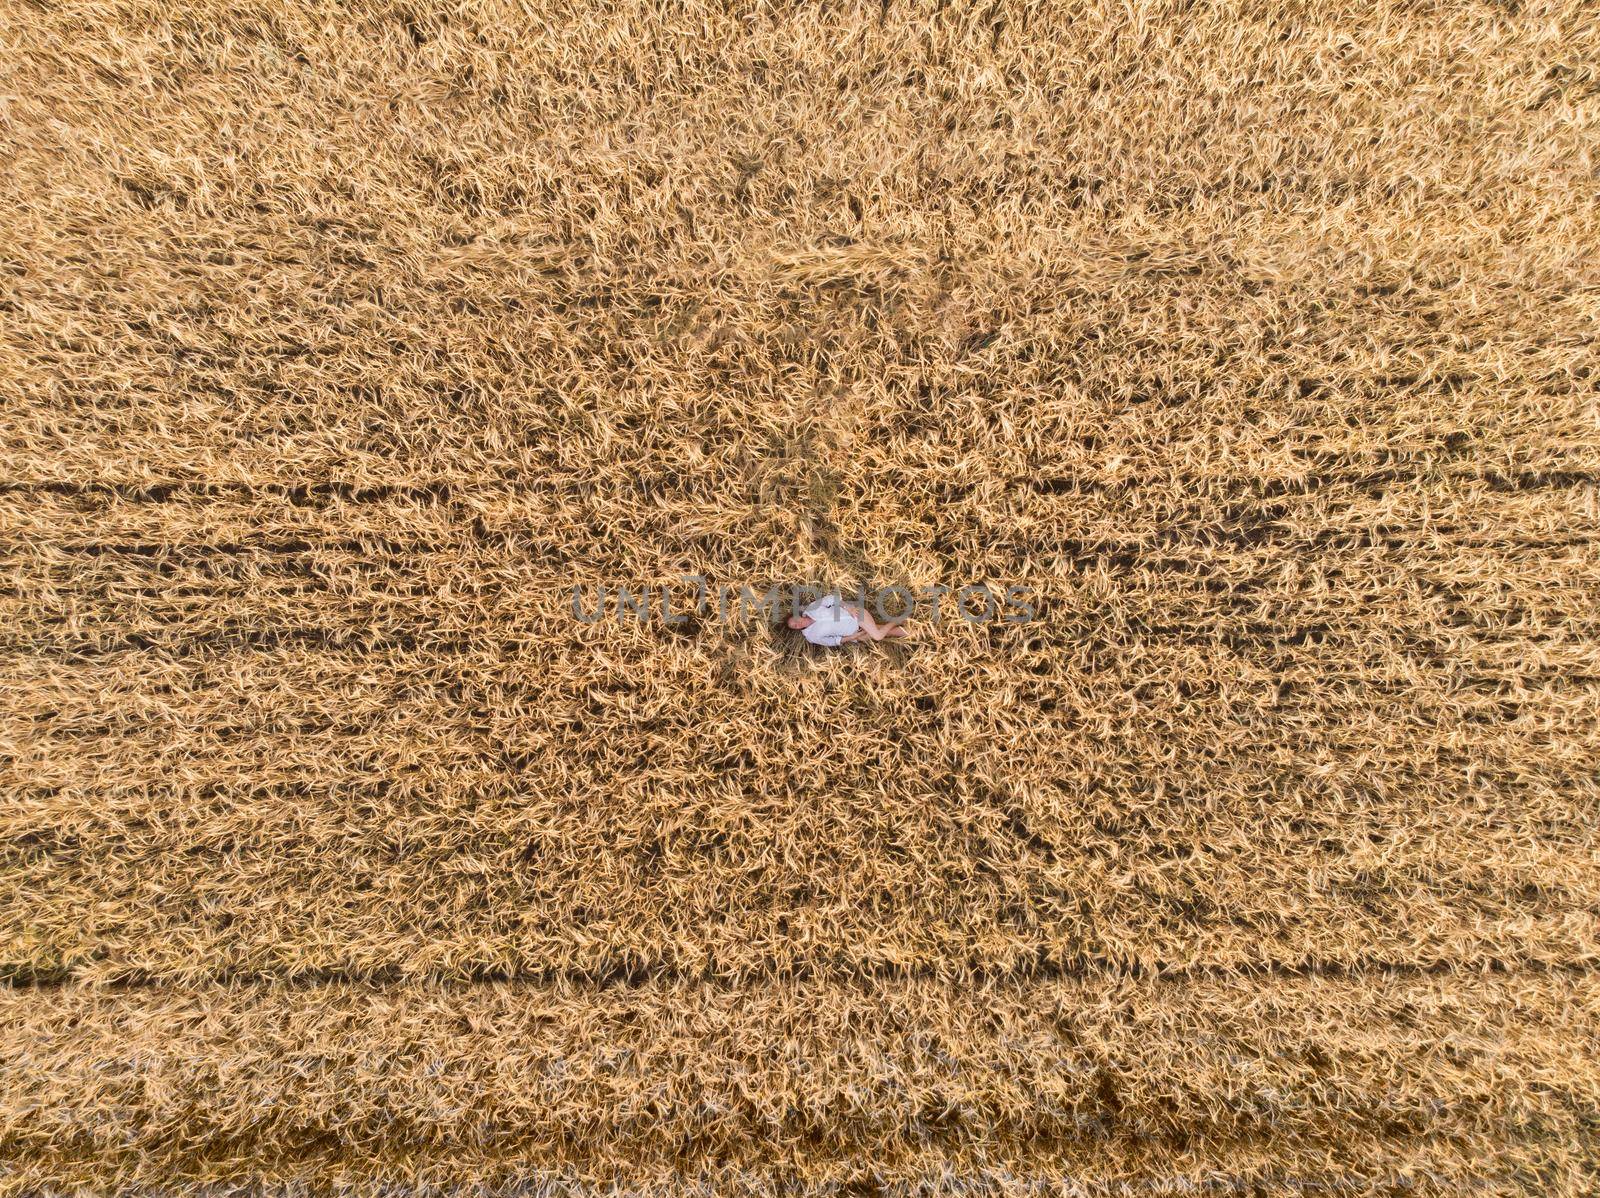 Aerial view of woman lying in the yellow field of wheat